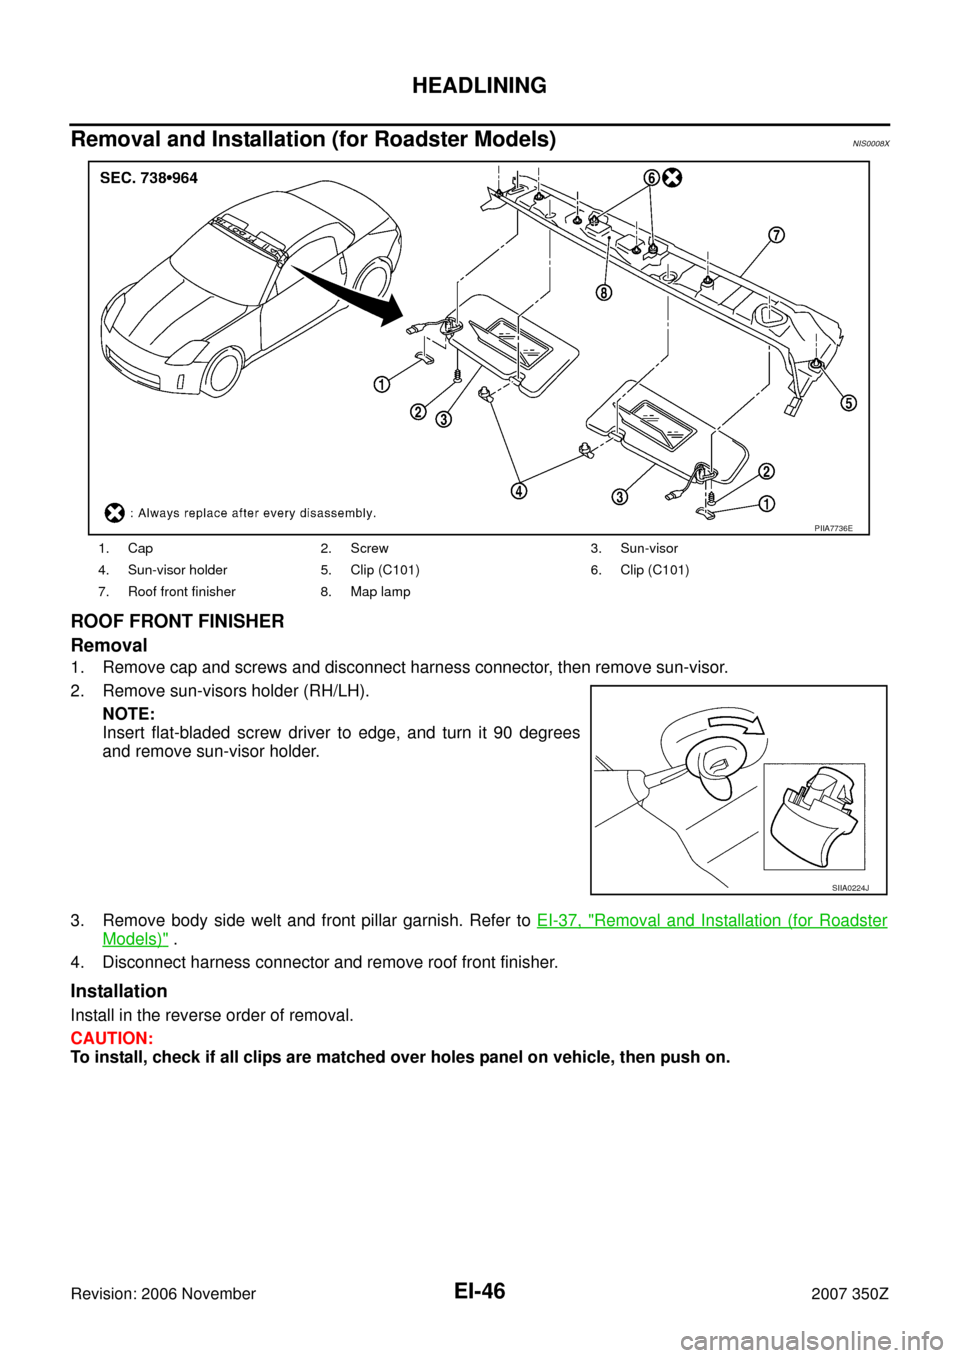 NISSAN 350Z 2007 Z33 Exterior And Interior Service Manual EI-46
HEADLINING
Revision: 2006 November2007 350Z
Removal and Installation (for Roadster Models)NIS0008X
ROOF FRONT FINISHER
Removal
1. Remove cap and screws and disconnect harness connector, then rem